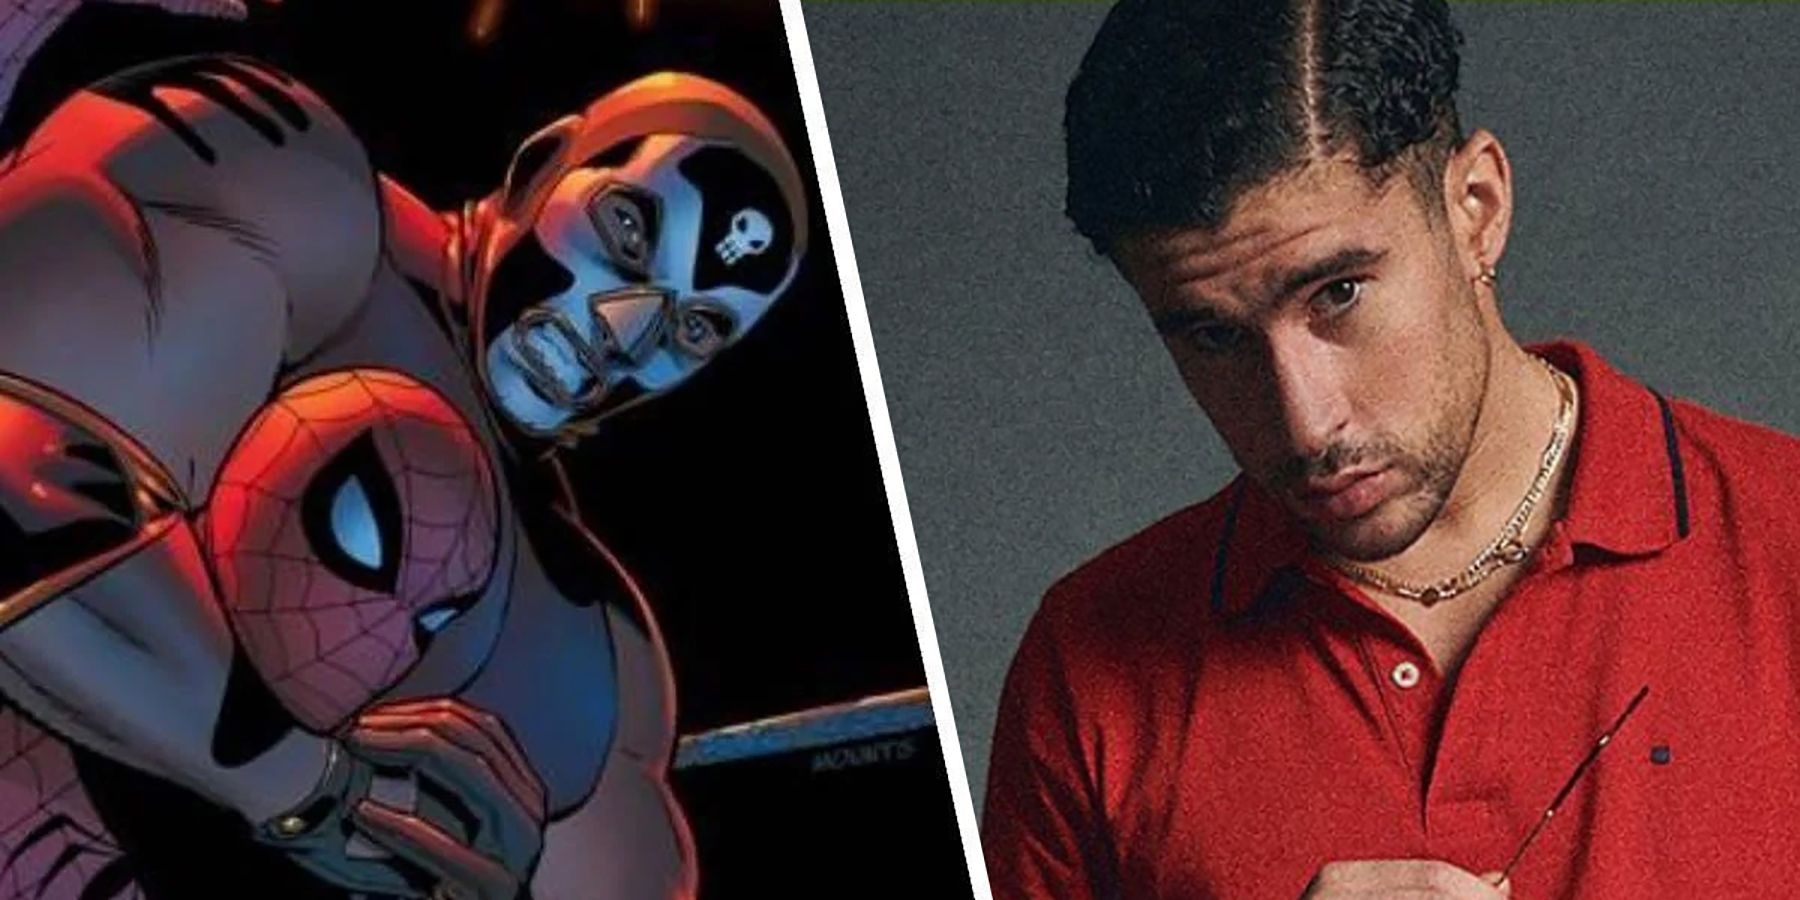 Bad Bunny Reacts To Being Cast As El Muerto In Spider-Man Spinoff Film